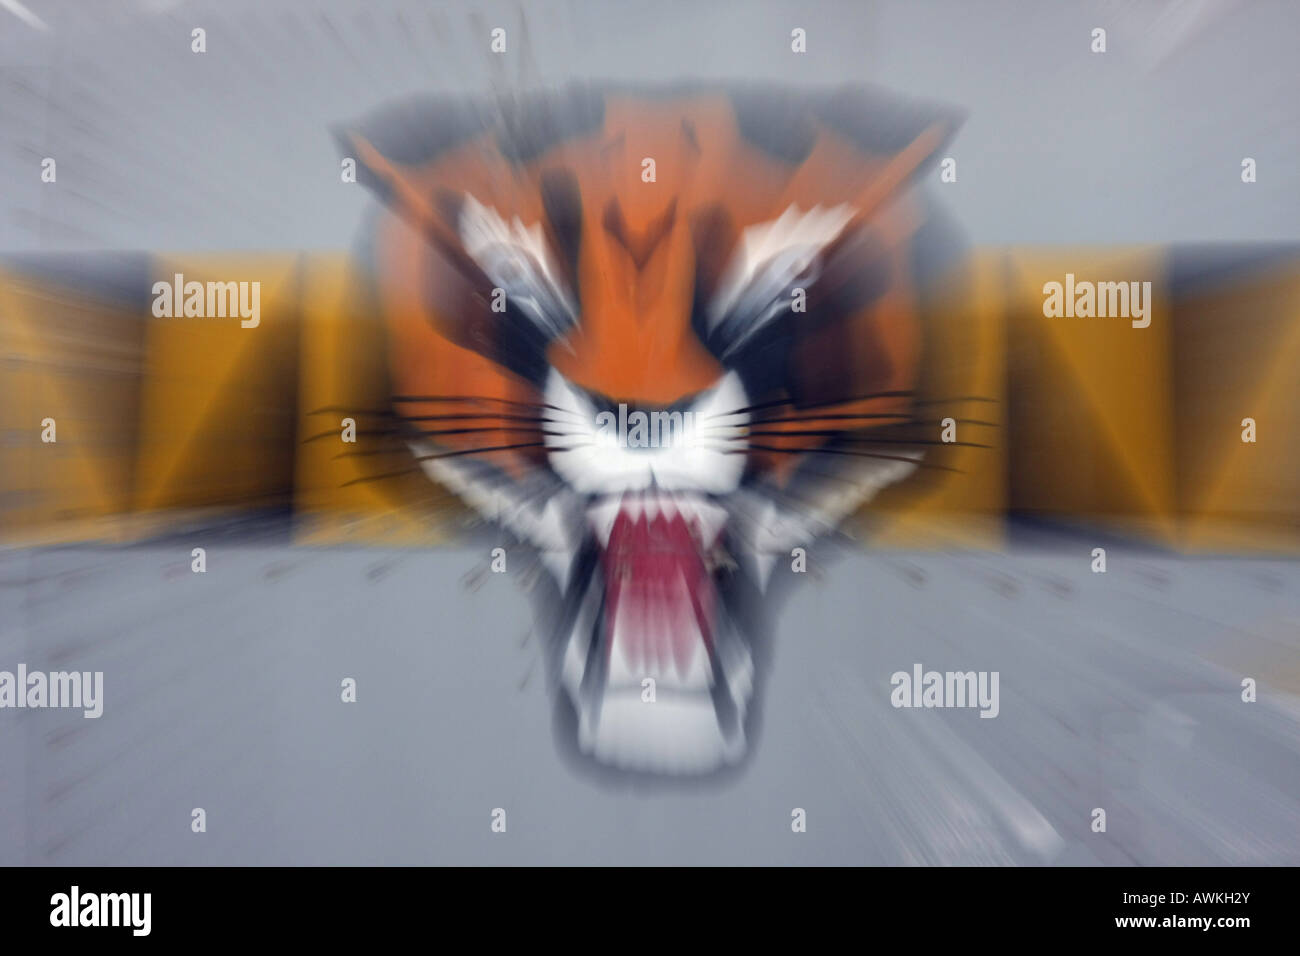 A tiger's head logo on the side of an aircraft Stock Photo